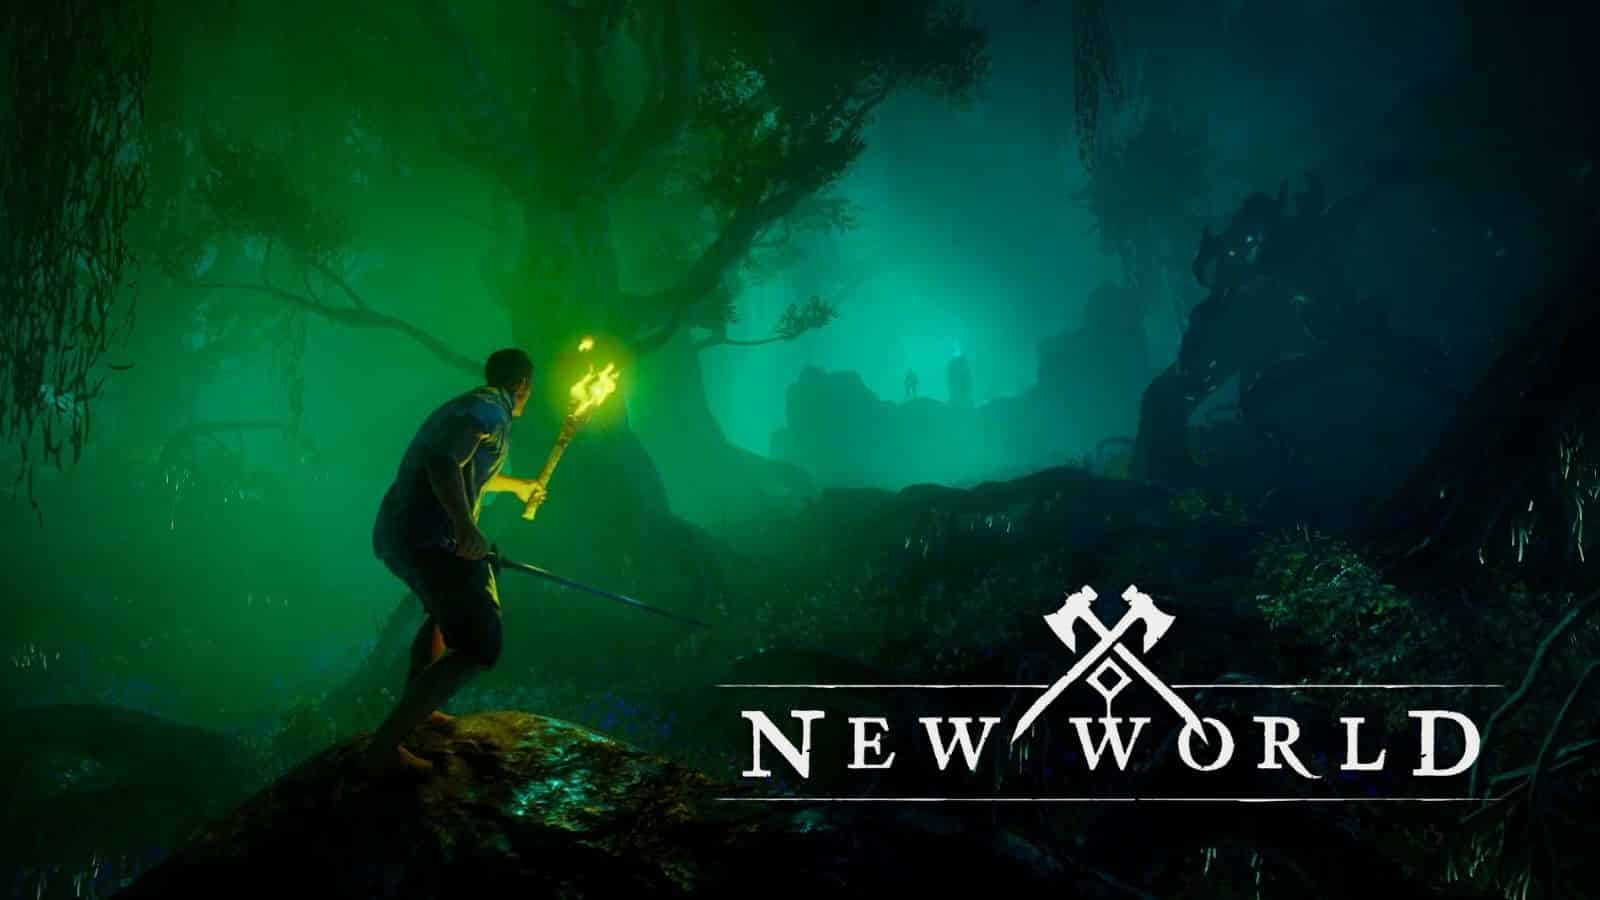 new world logo and person